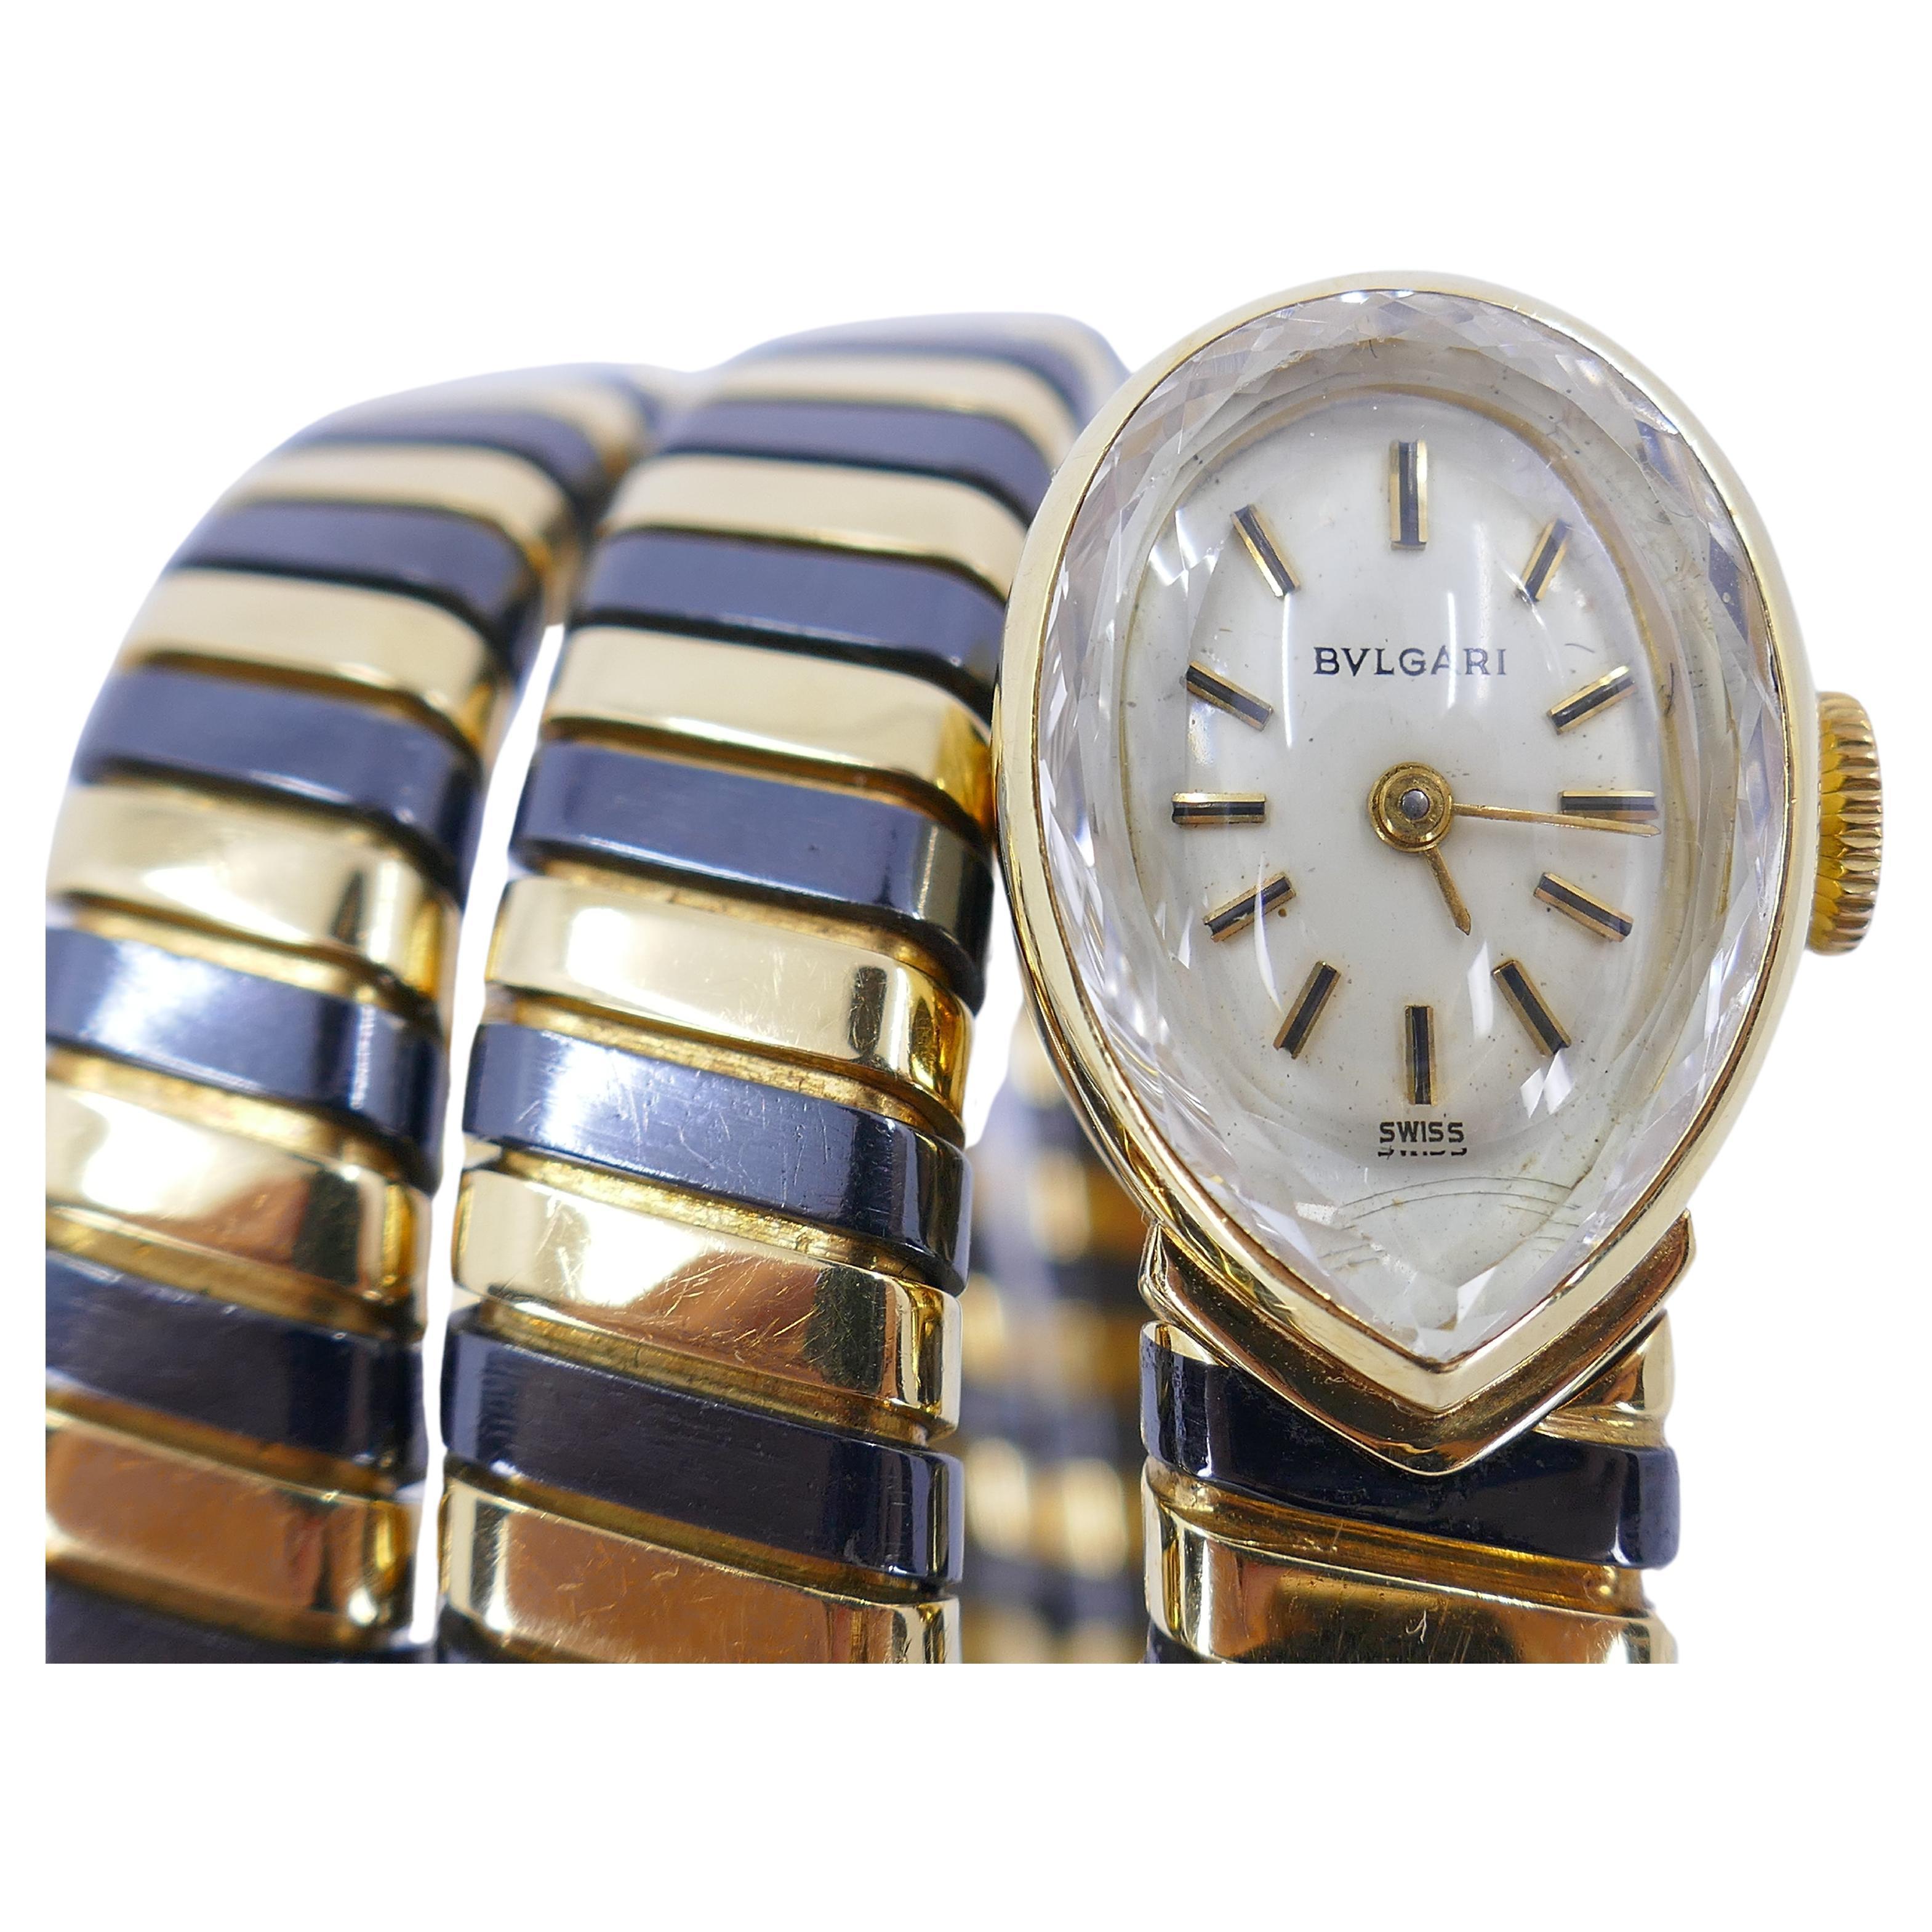 A rare version of the iconic Bulgari Tubogas watch made in  alternated blackened and yellow 18k gold. The case is pear-shaped, with white face, gold batons and gold bar indices decorated with black enamel. 
The watch is elegant, refined, and yet